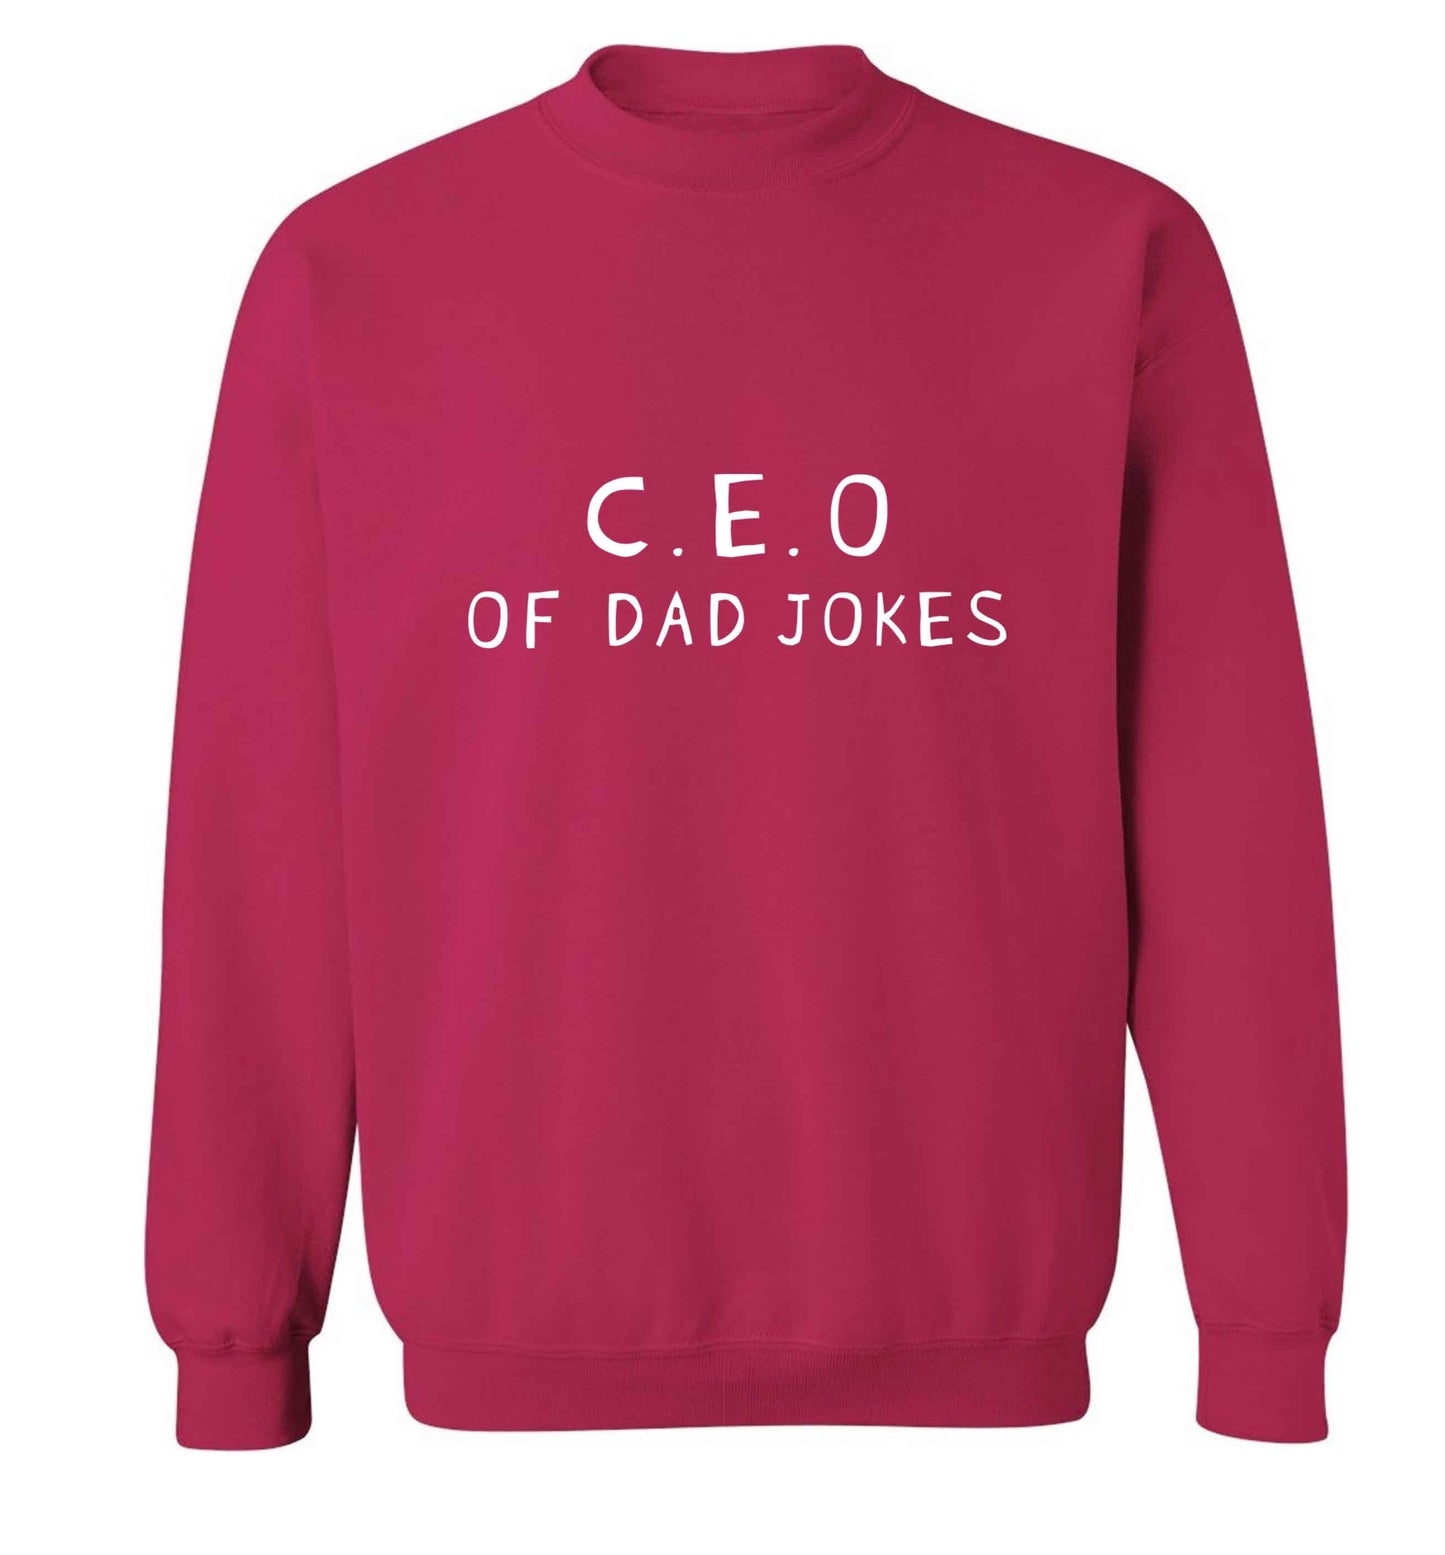 We love this for YOU! Who else loves saying this?!  adult's unisex pink sweater 2XL